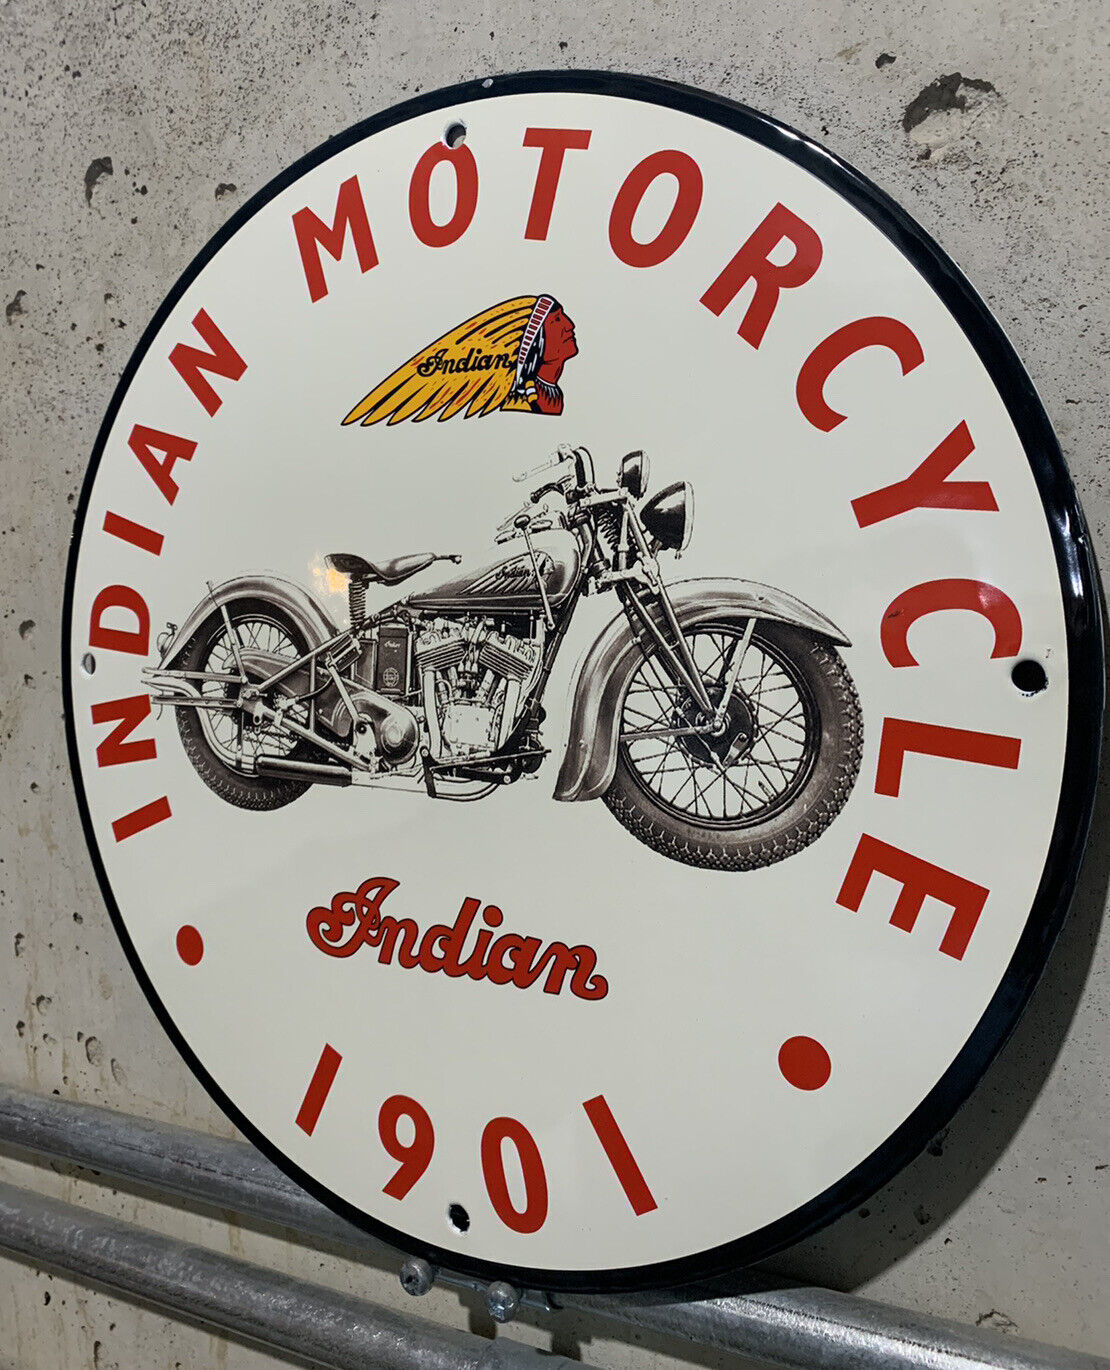 Vintage Style Indian Motorcycle Since 1901 Advertising Porcelain Sign